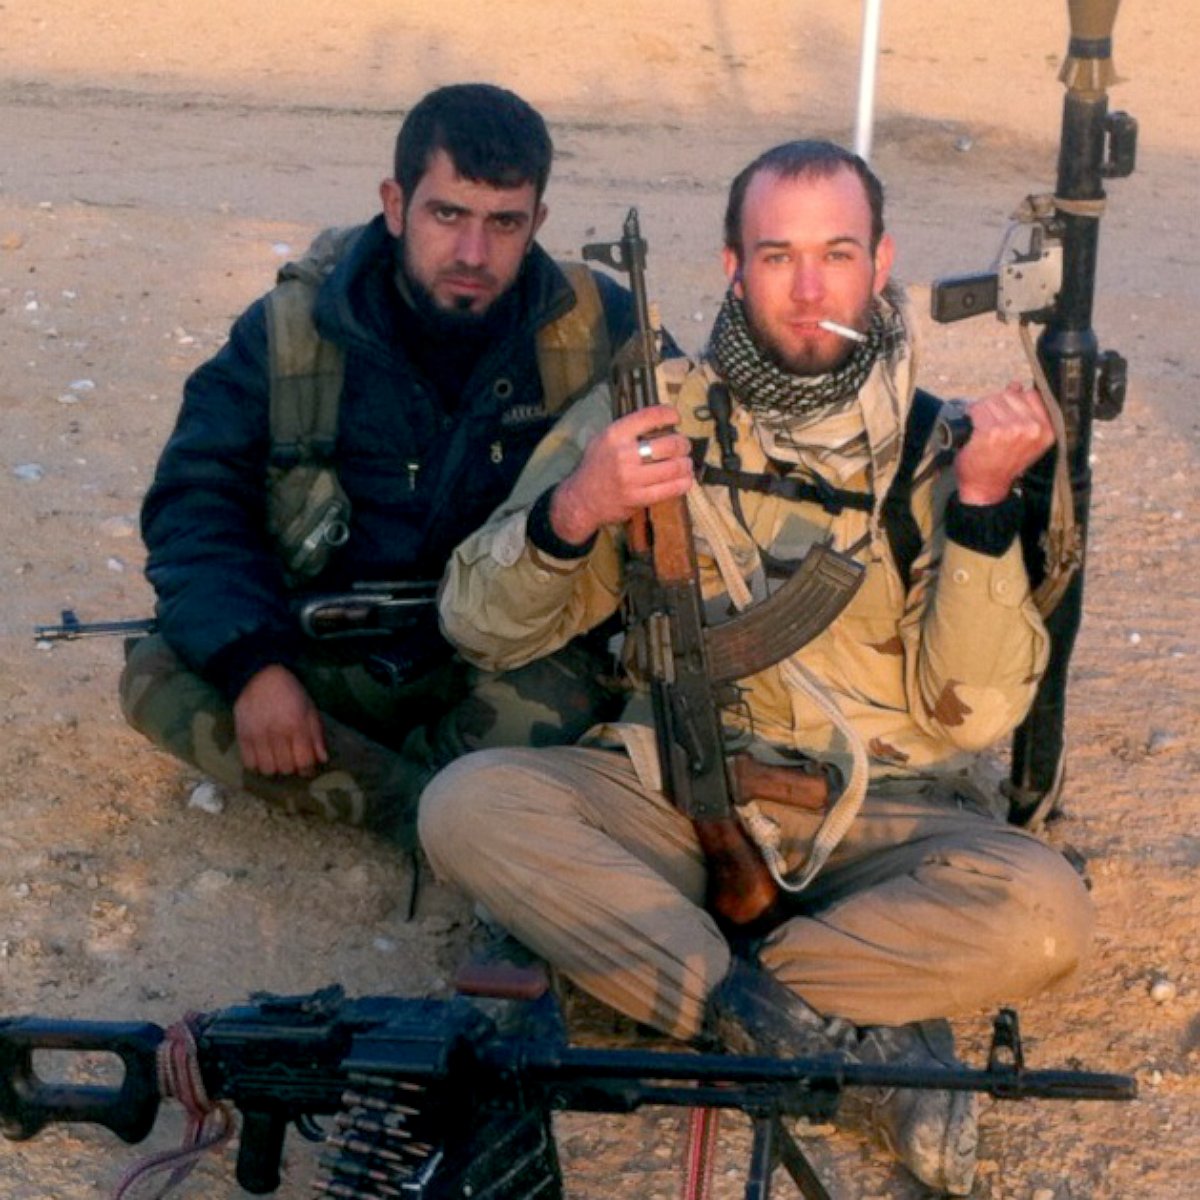 PHOTO: Eric Harroun, a U.S. Army veteran, right, fought with the rebels in Syria.